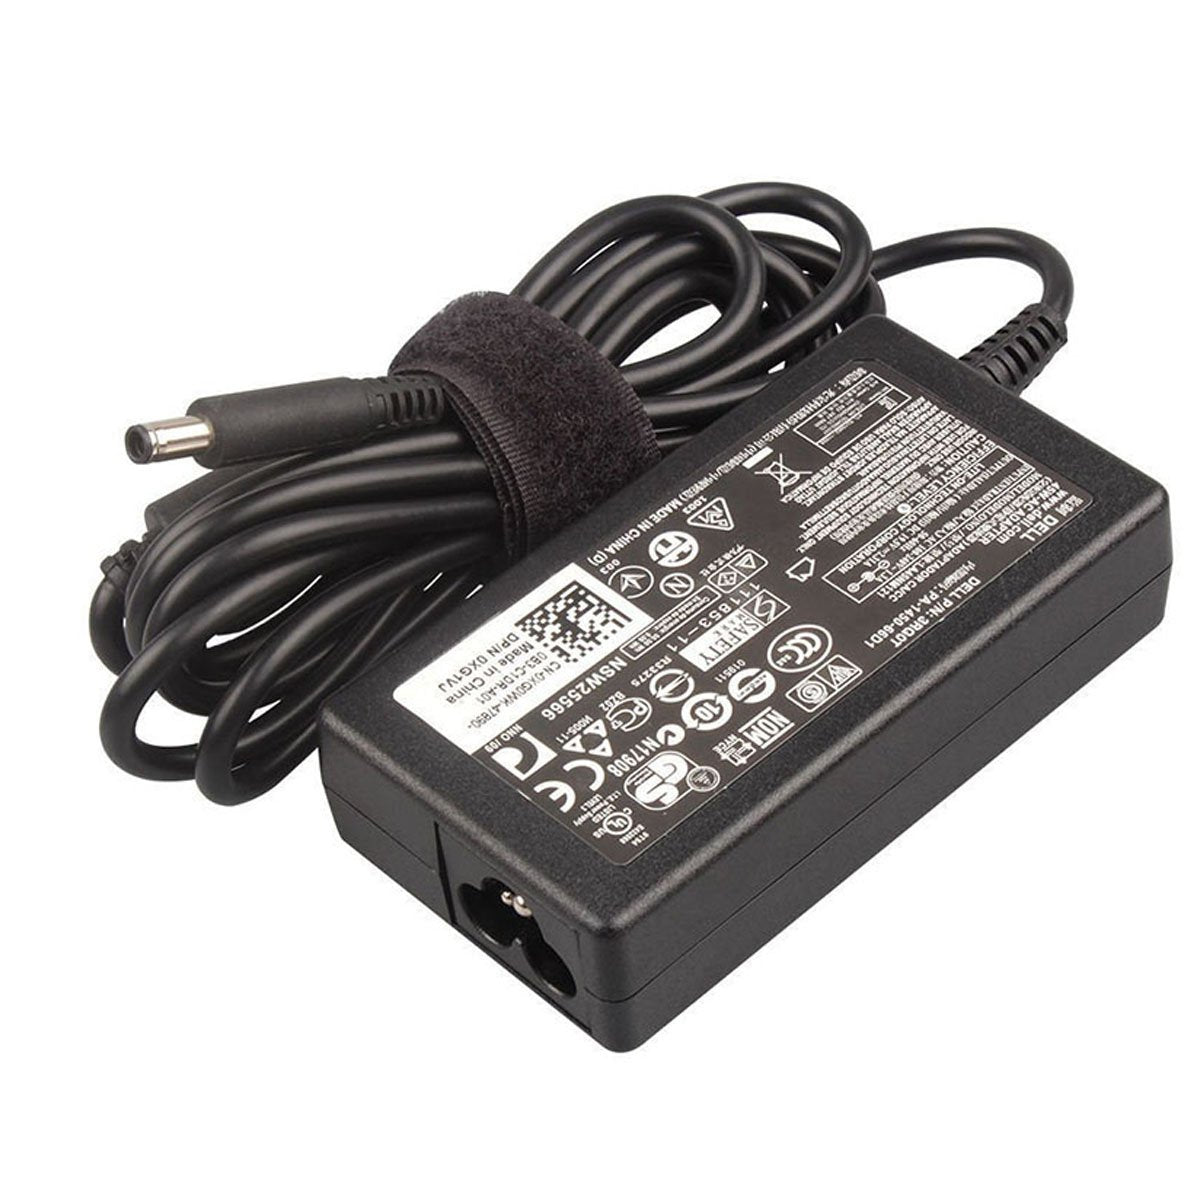 Dell Original 45W 19.5V 4.5mm Pin Laptop Charger Adapter for Inspiron 13 5378 With Power Cord